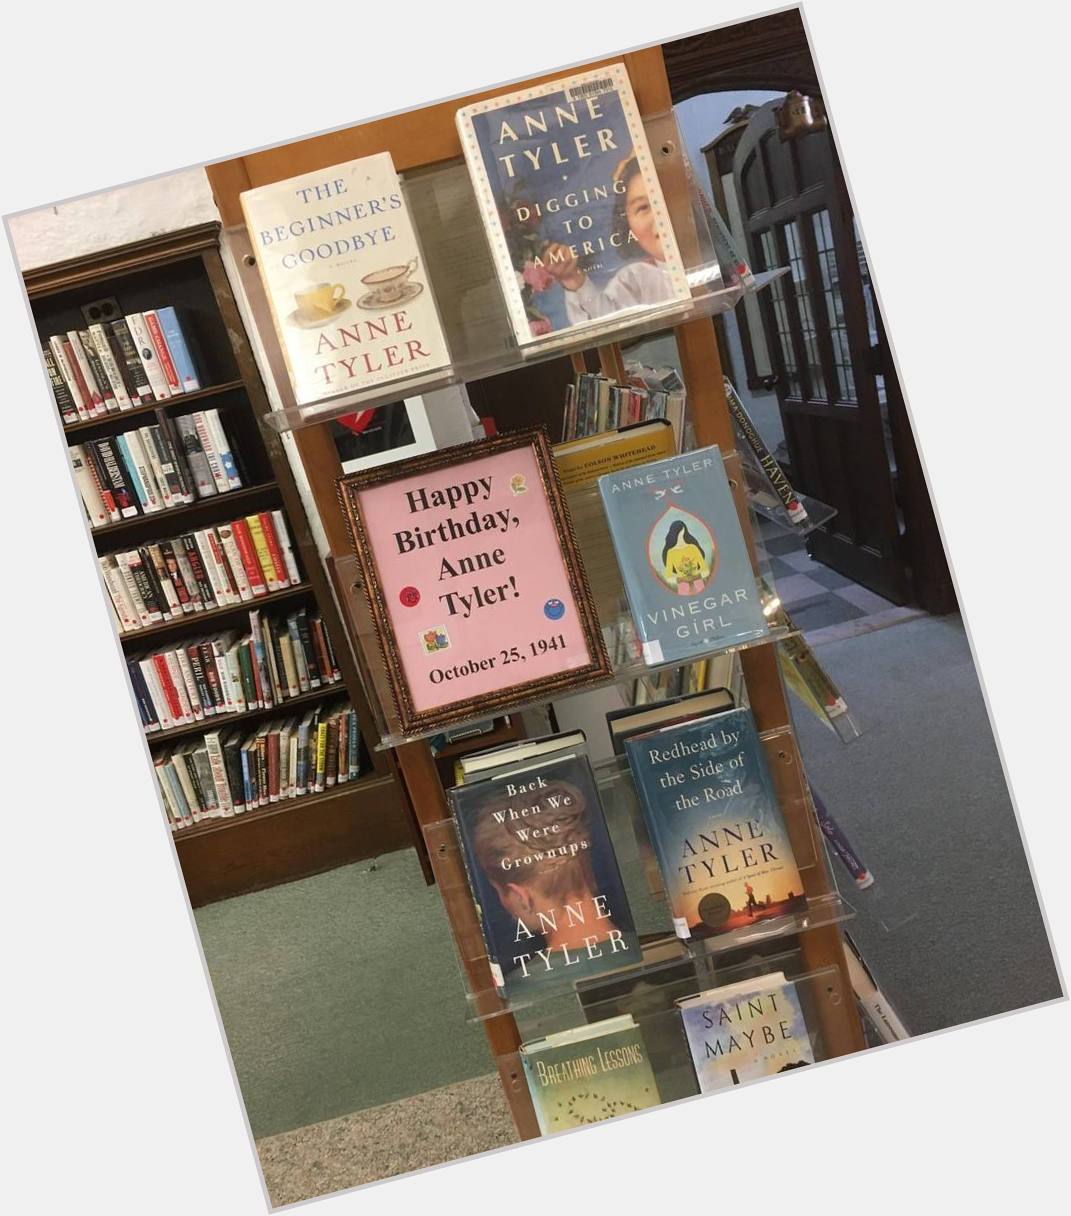 Happy birthday Anne Tyler!  Check out our display of her books!     